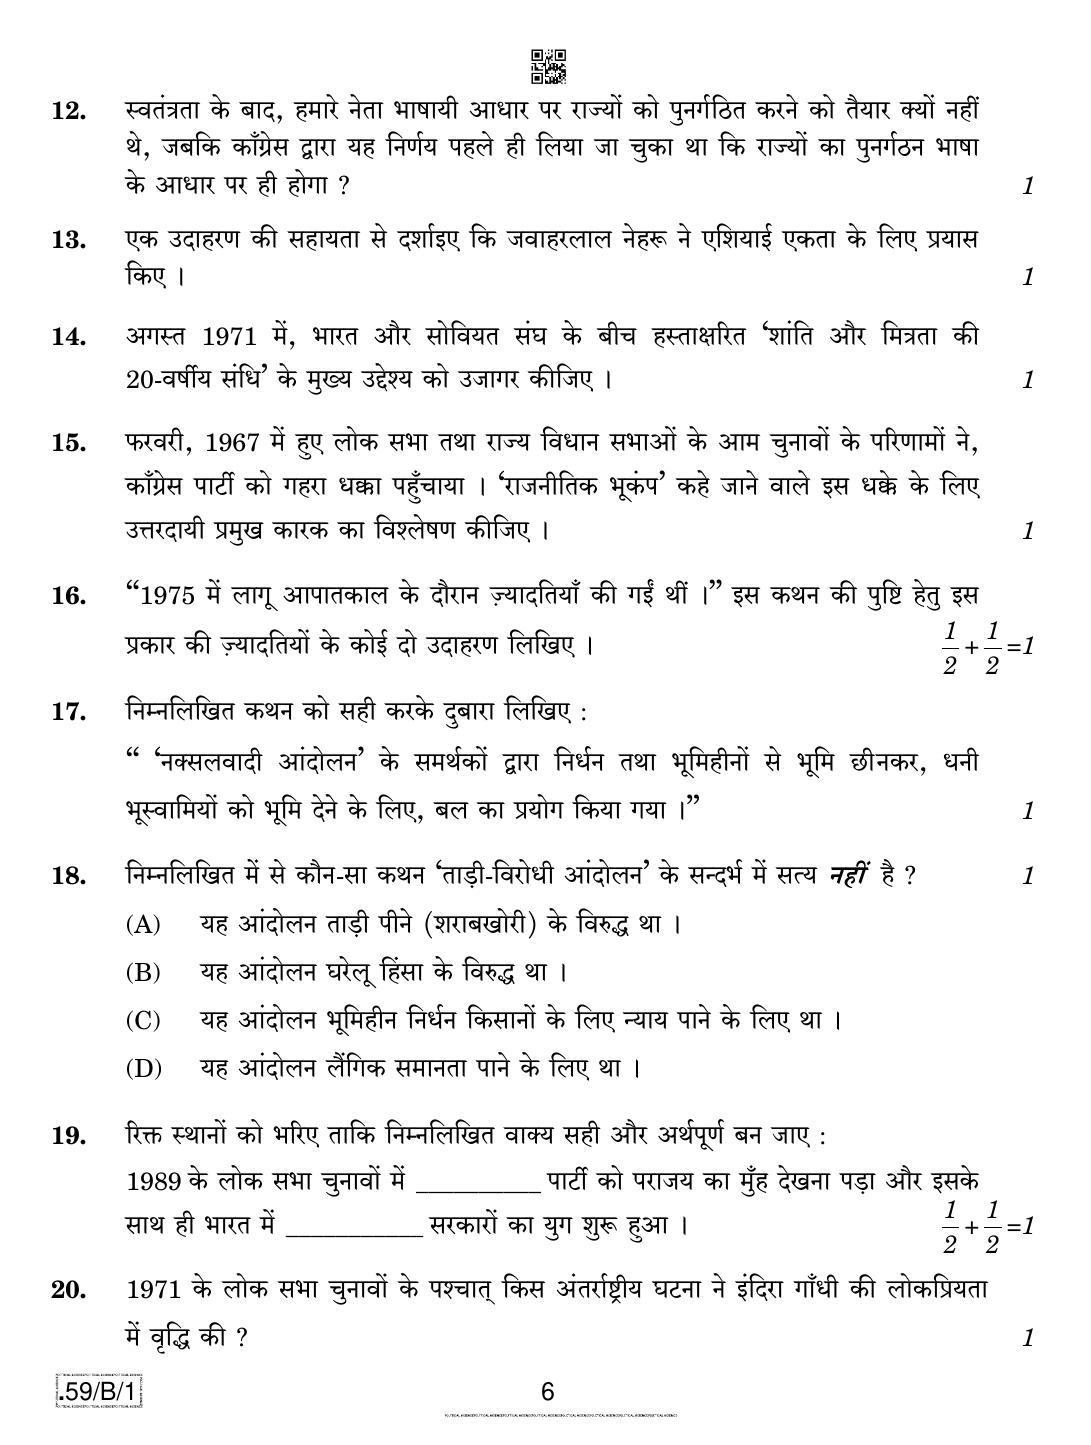 CBSE Class 12 59-C-1 - Political Science 2020 Compartment Question Paper - Page 6